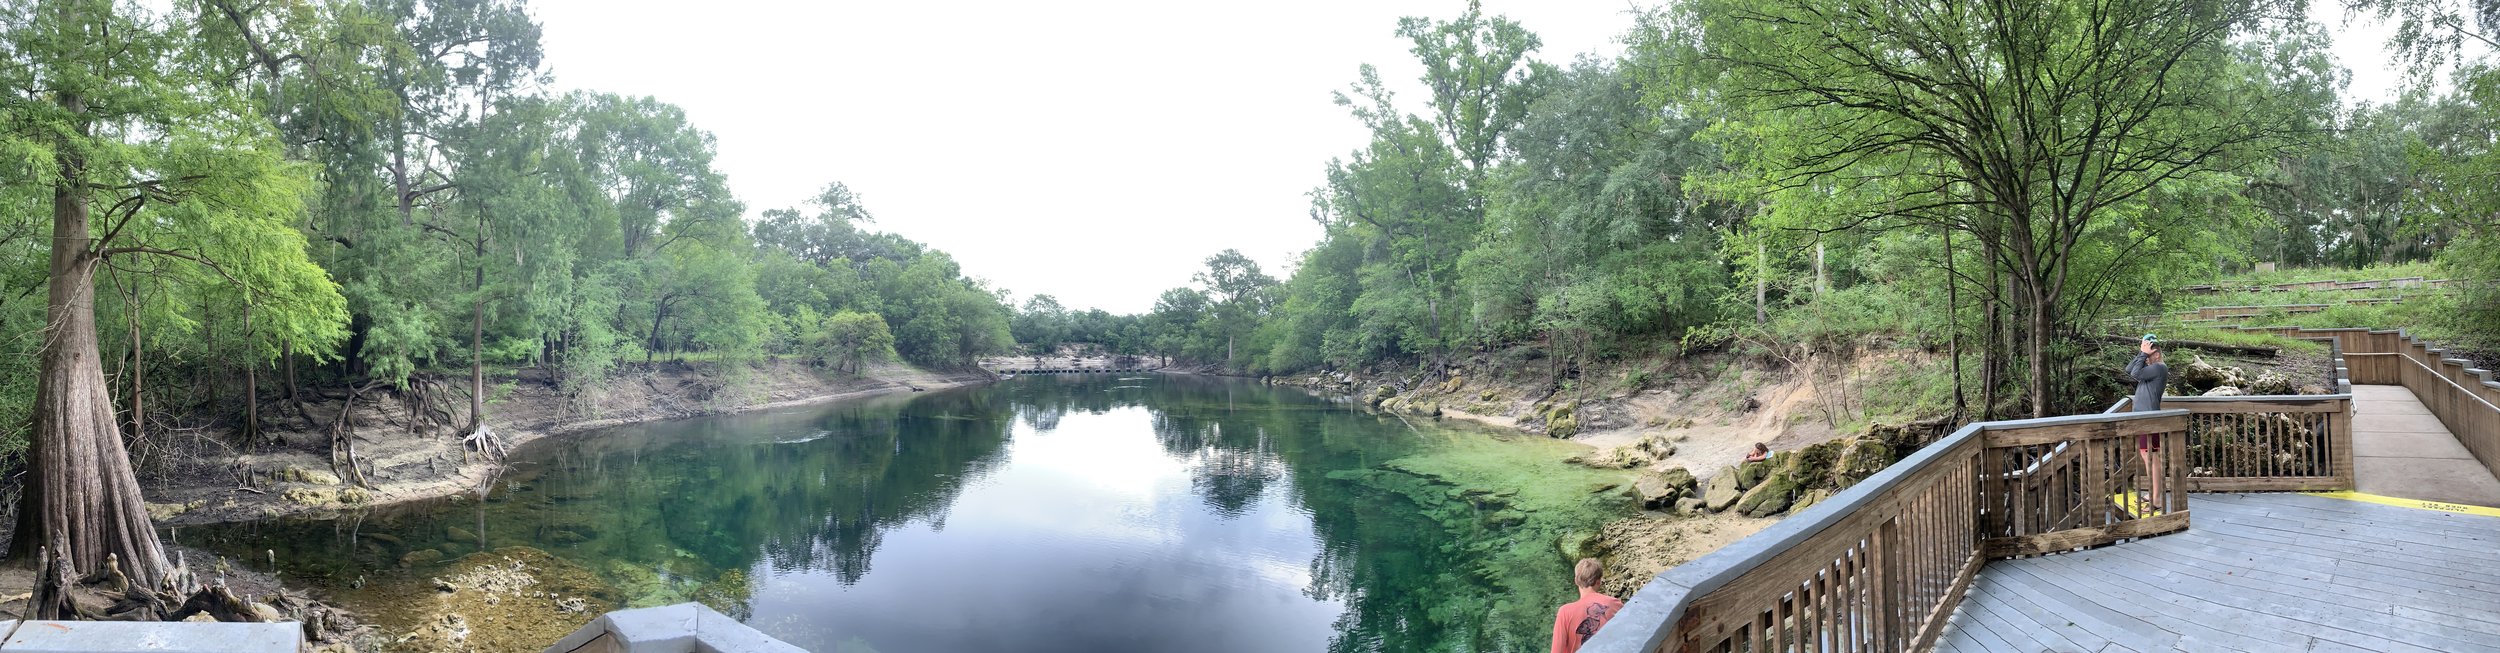 Troy Springs and Spring Run connection to the Suwannee River